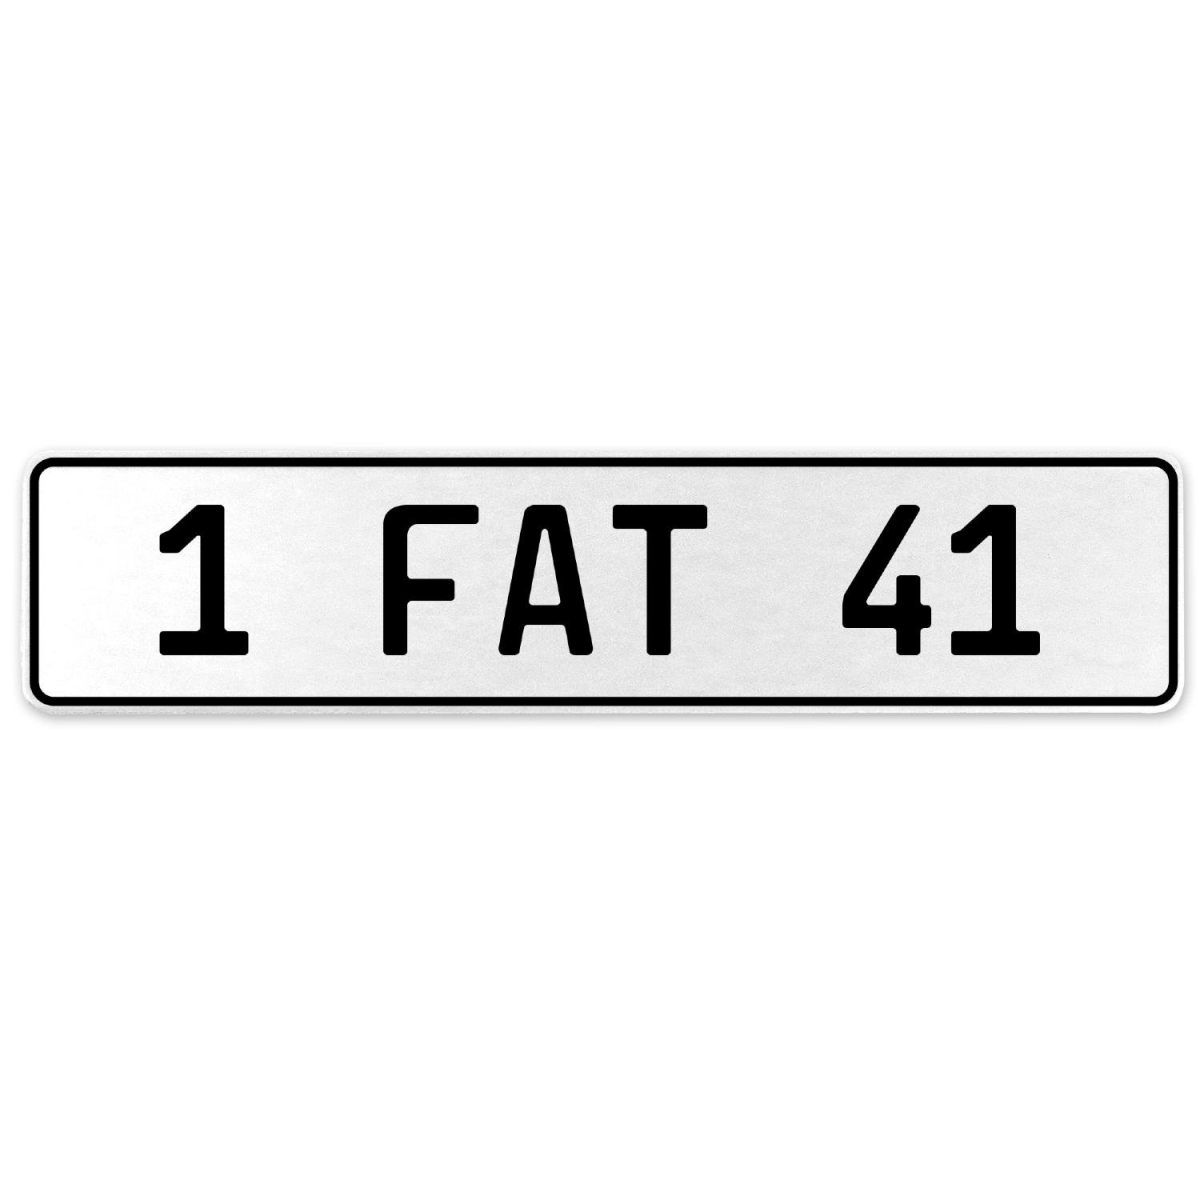 554638 1 Fat 41 - White Aluminum Street Sign Mancave Euro Plate Name Door Sign Wall